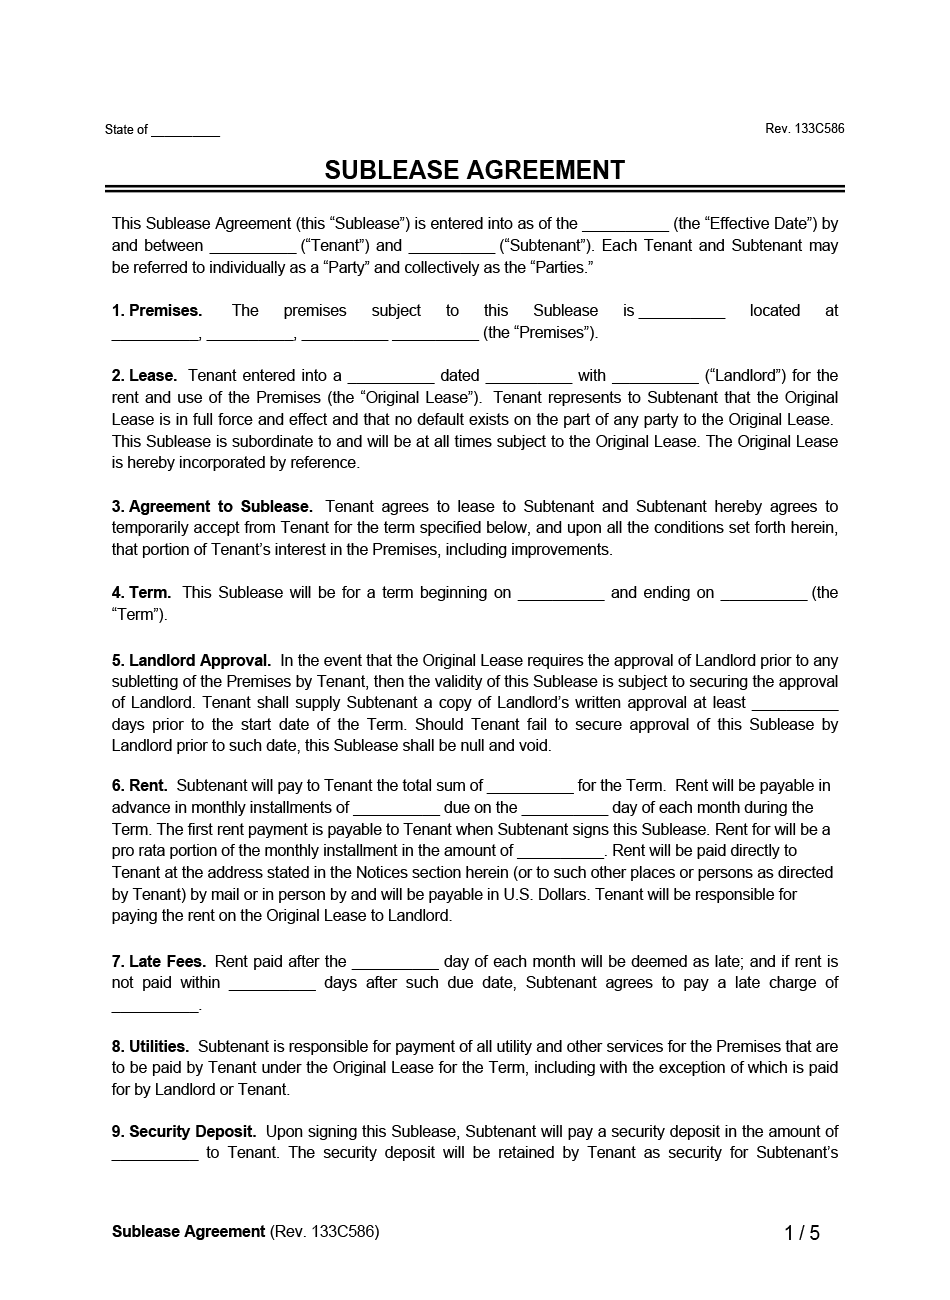 Sublease Agreement example form